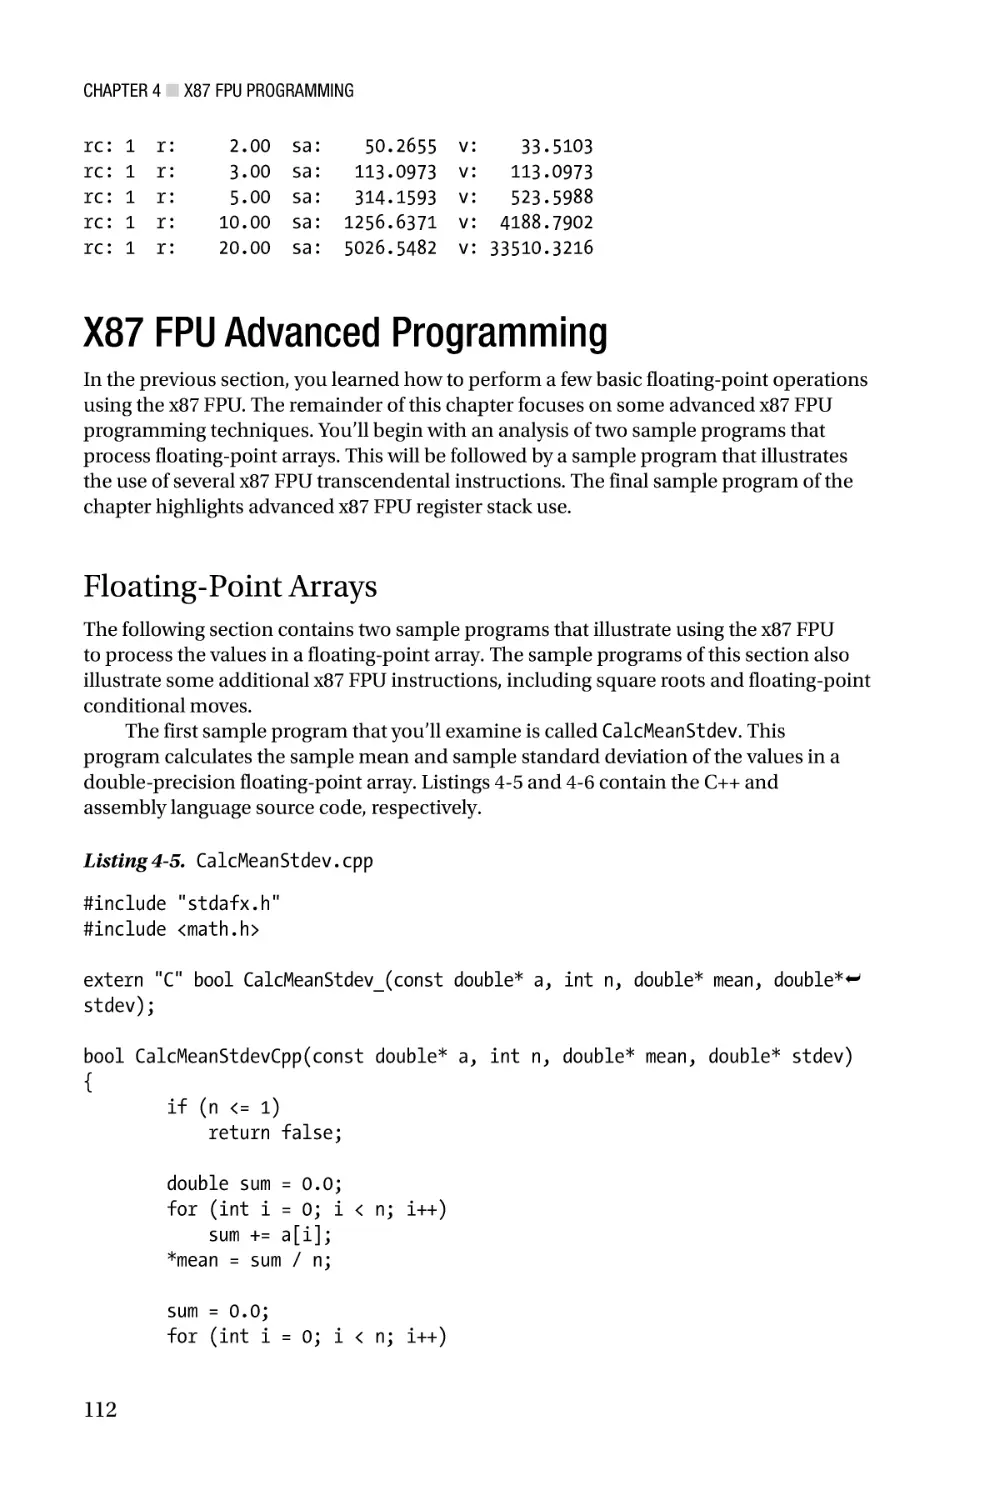 X87 FPU Advanced Programming
Floating-Point Arrays